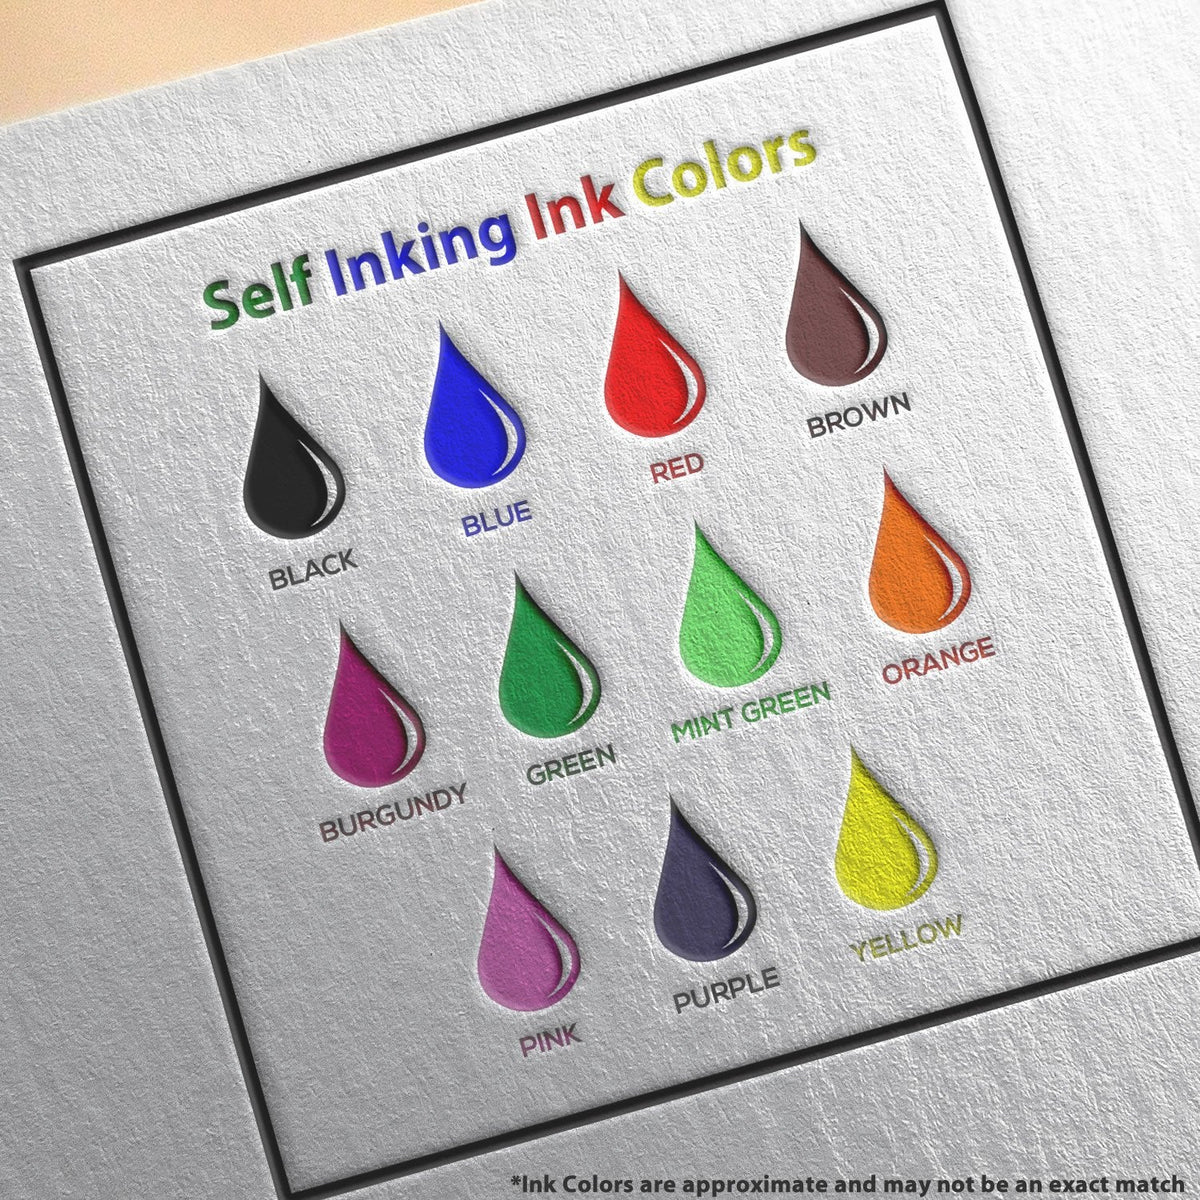 Self-Inking Received with Line Stamp Ink Color Options